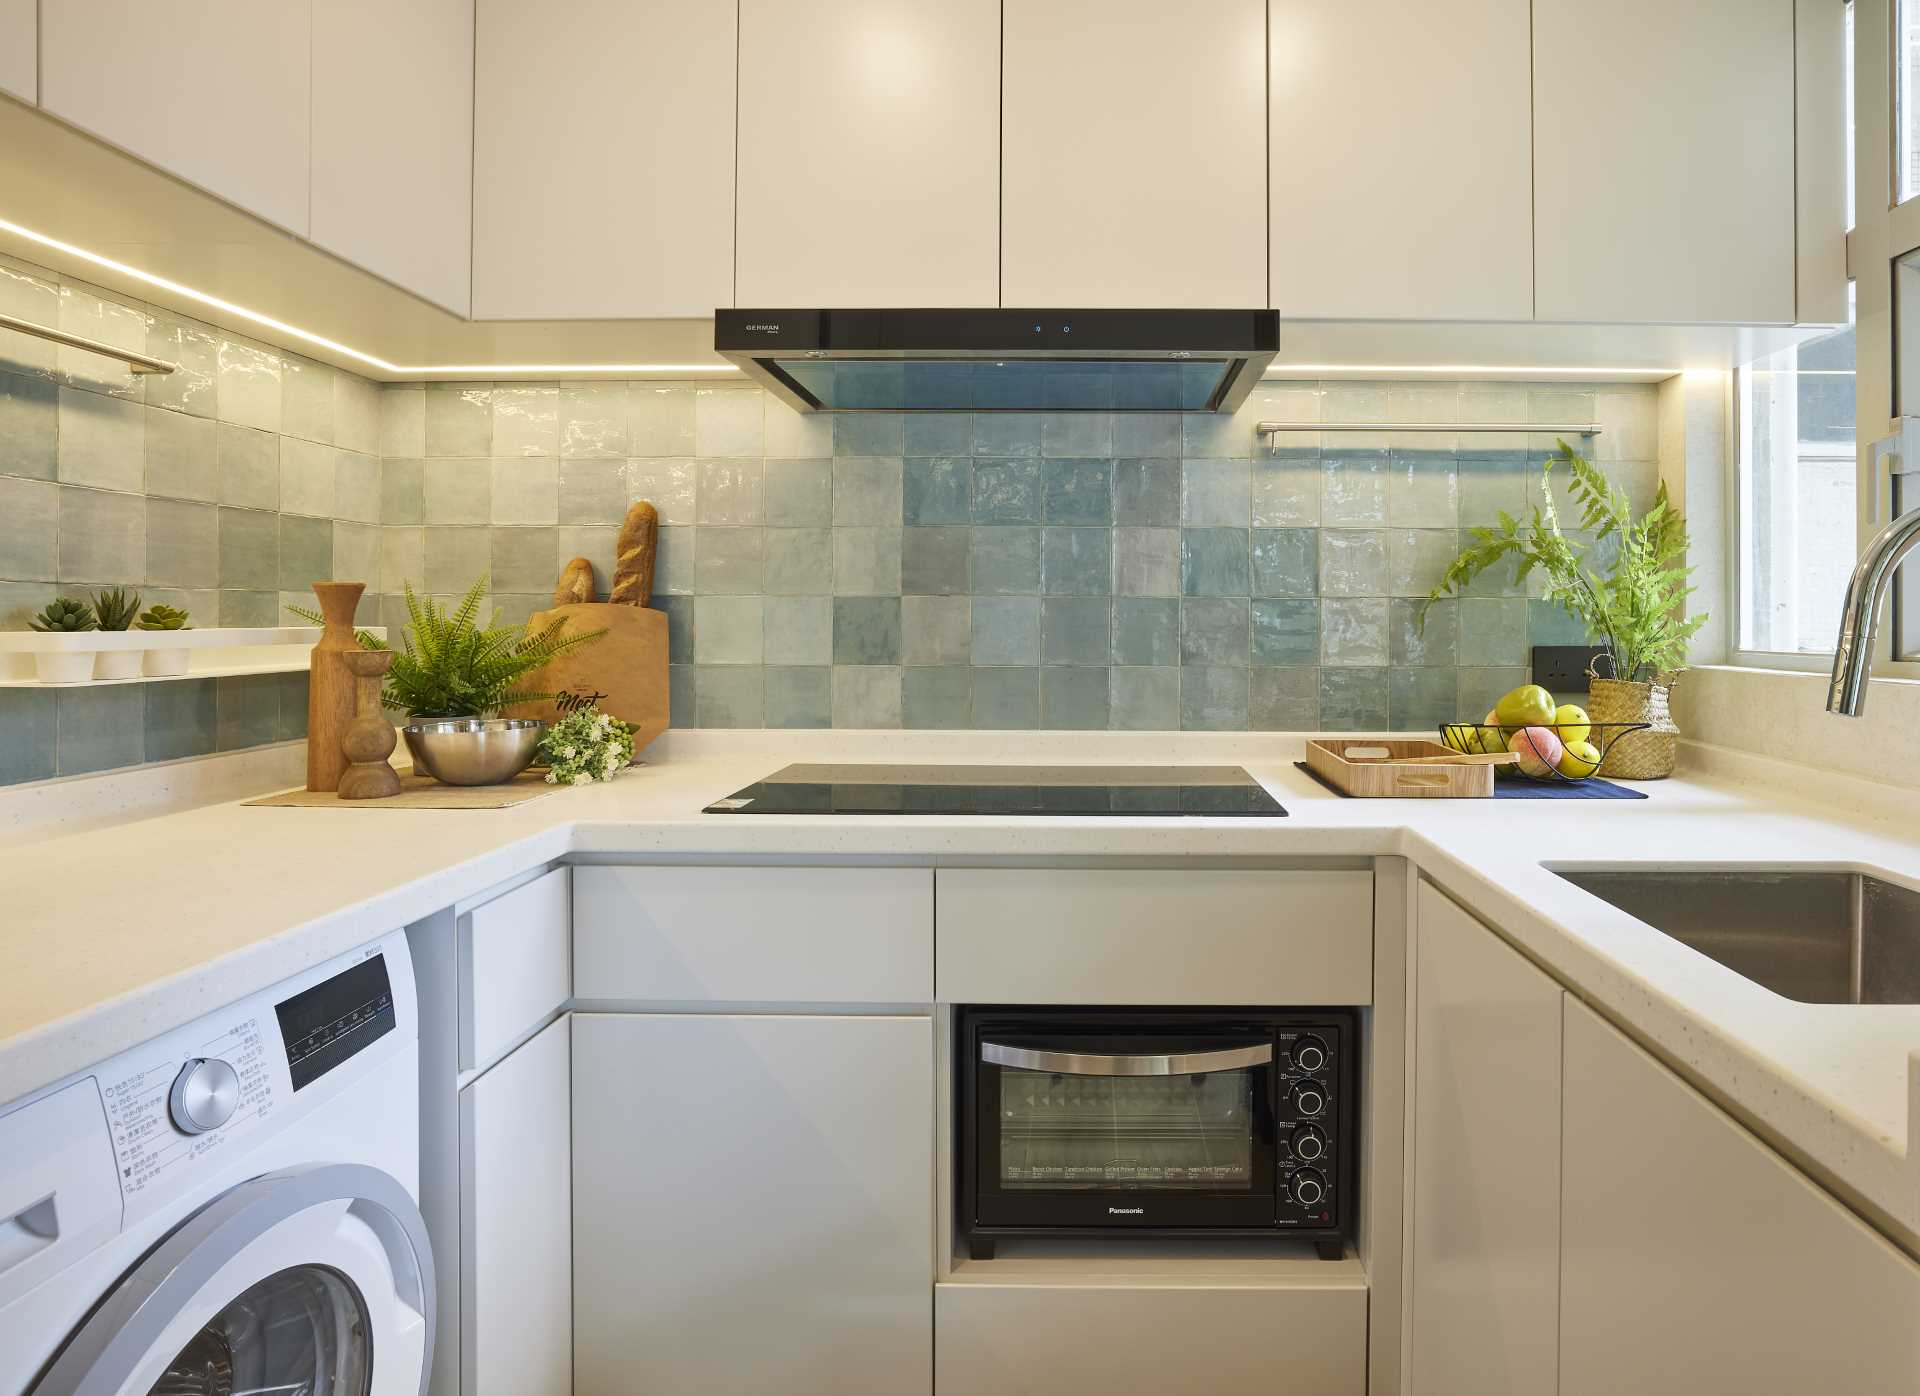 In this small kitchen, the aqua coloured handmade tiles juxtapose with the off-white spray painted kitchen cabinets, and helps to add layers and depth to the compact kitchen.